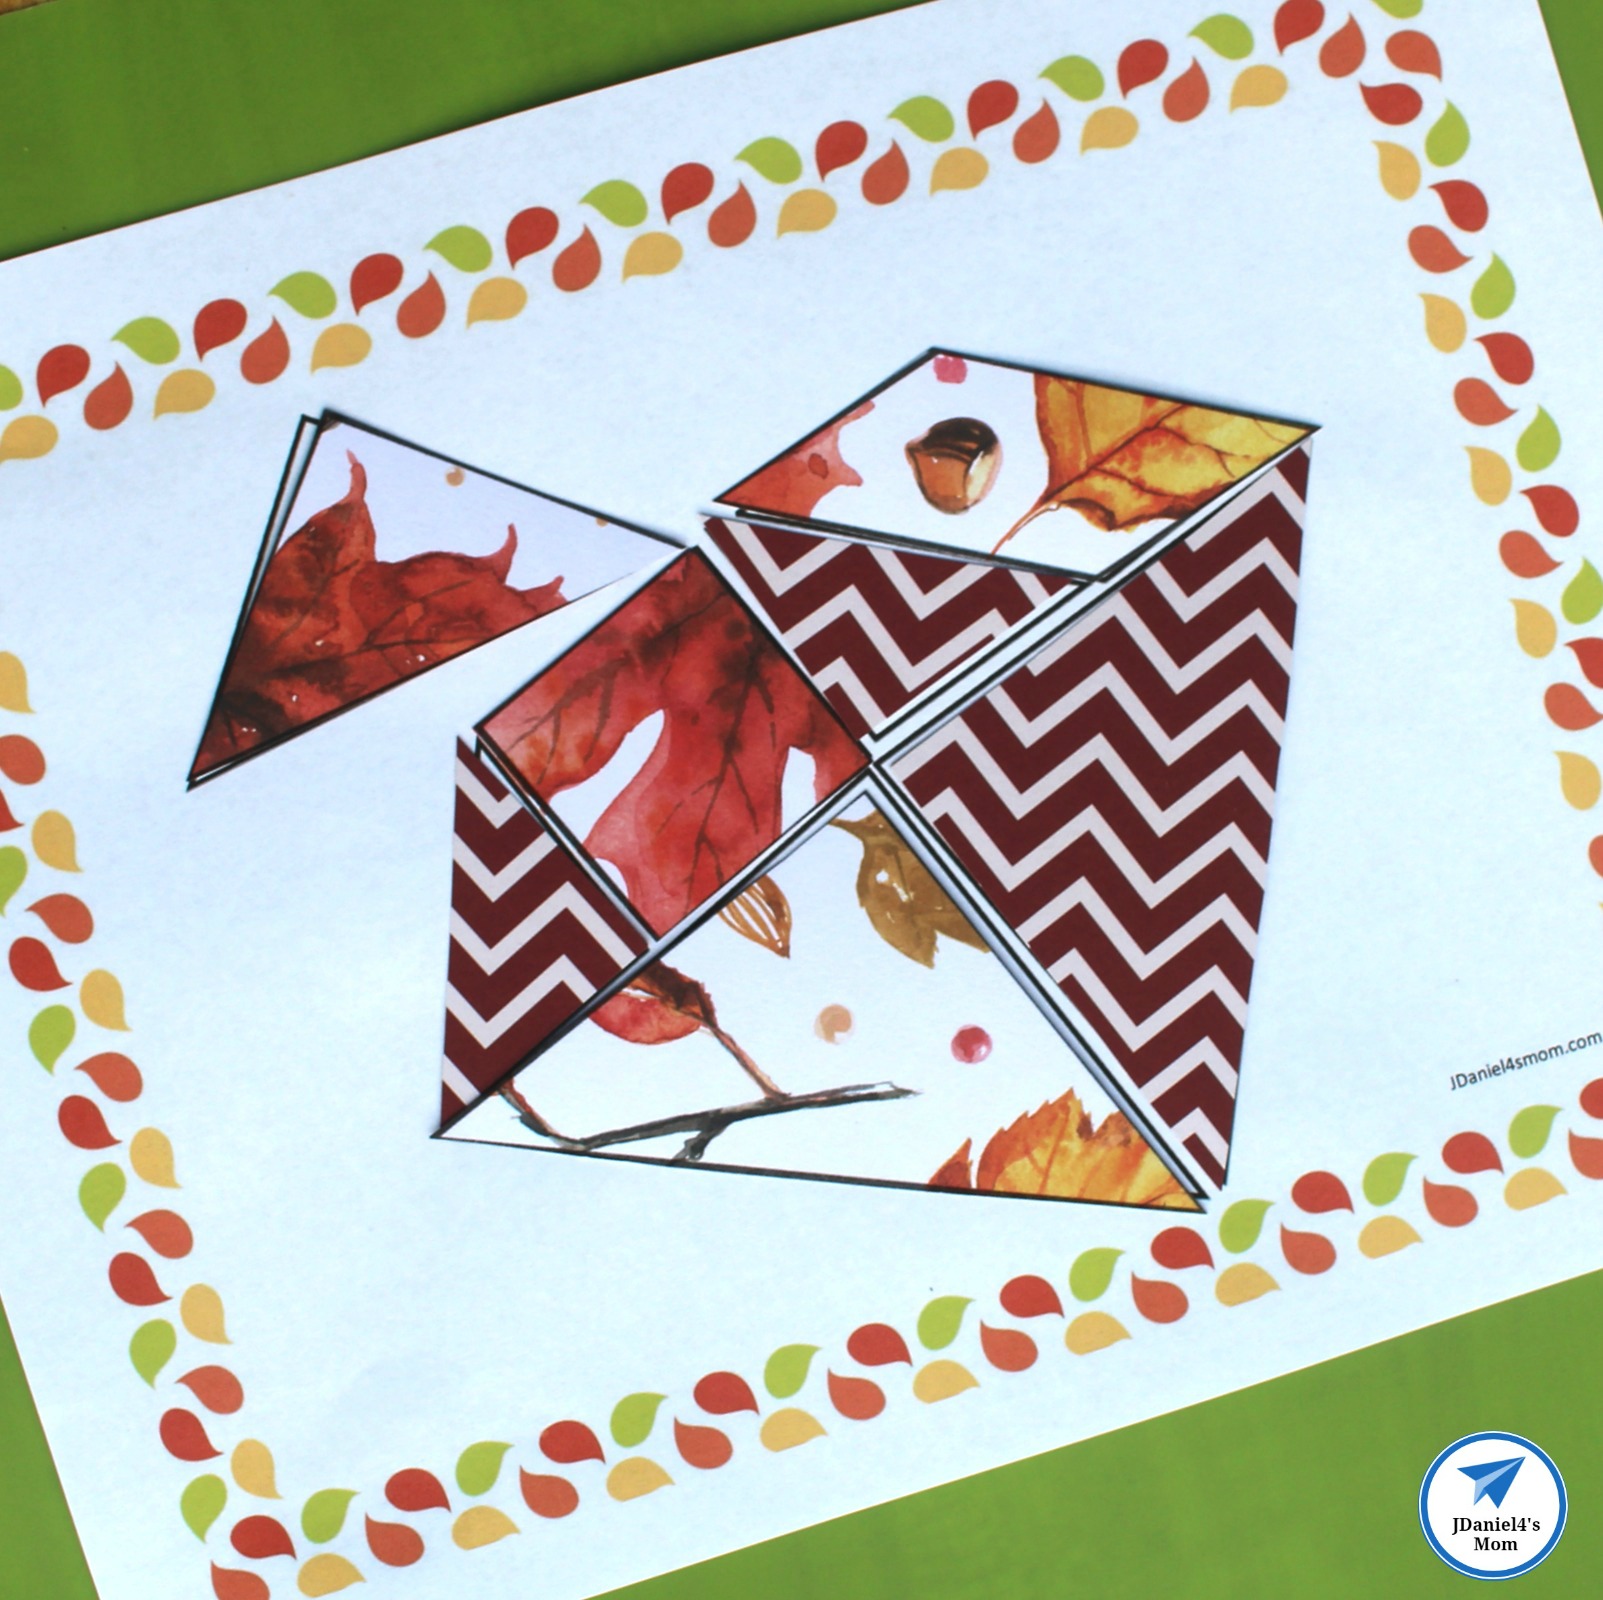 Fall-Themed Printable Tangram Puzzles - Completed Acorn Pattern